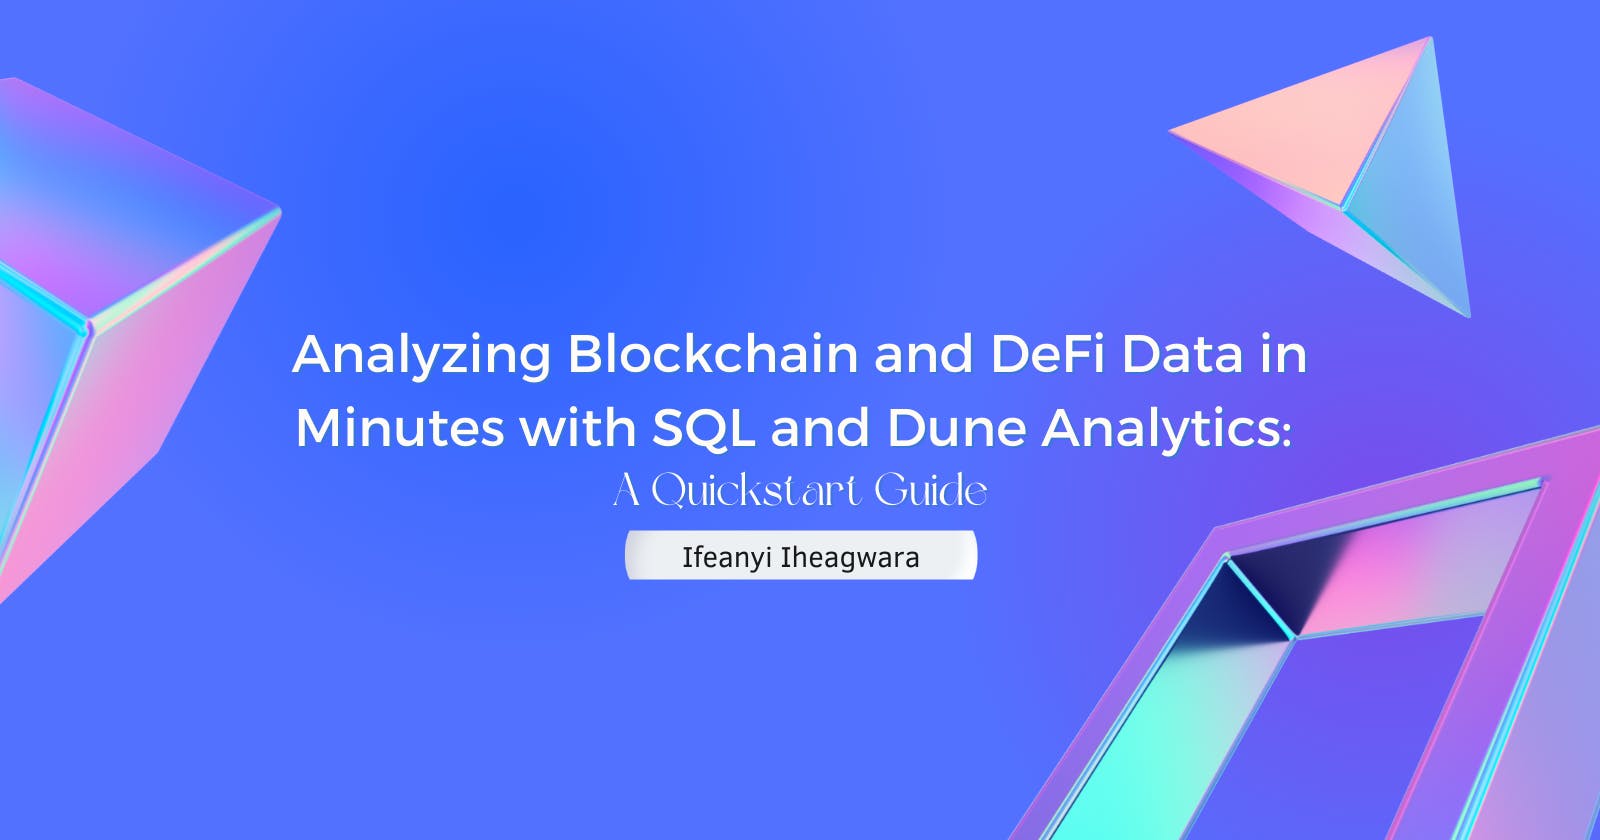 Analyze Blockchain and DeFi data in minutes with SQL and Dune Analytics: A Quickstart Guide